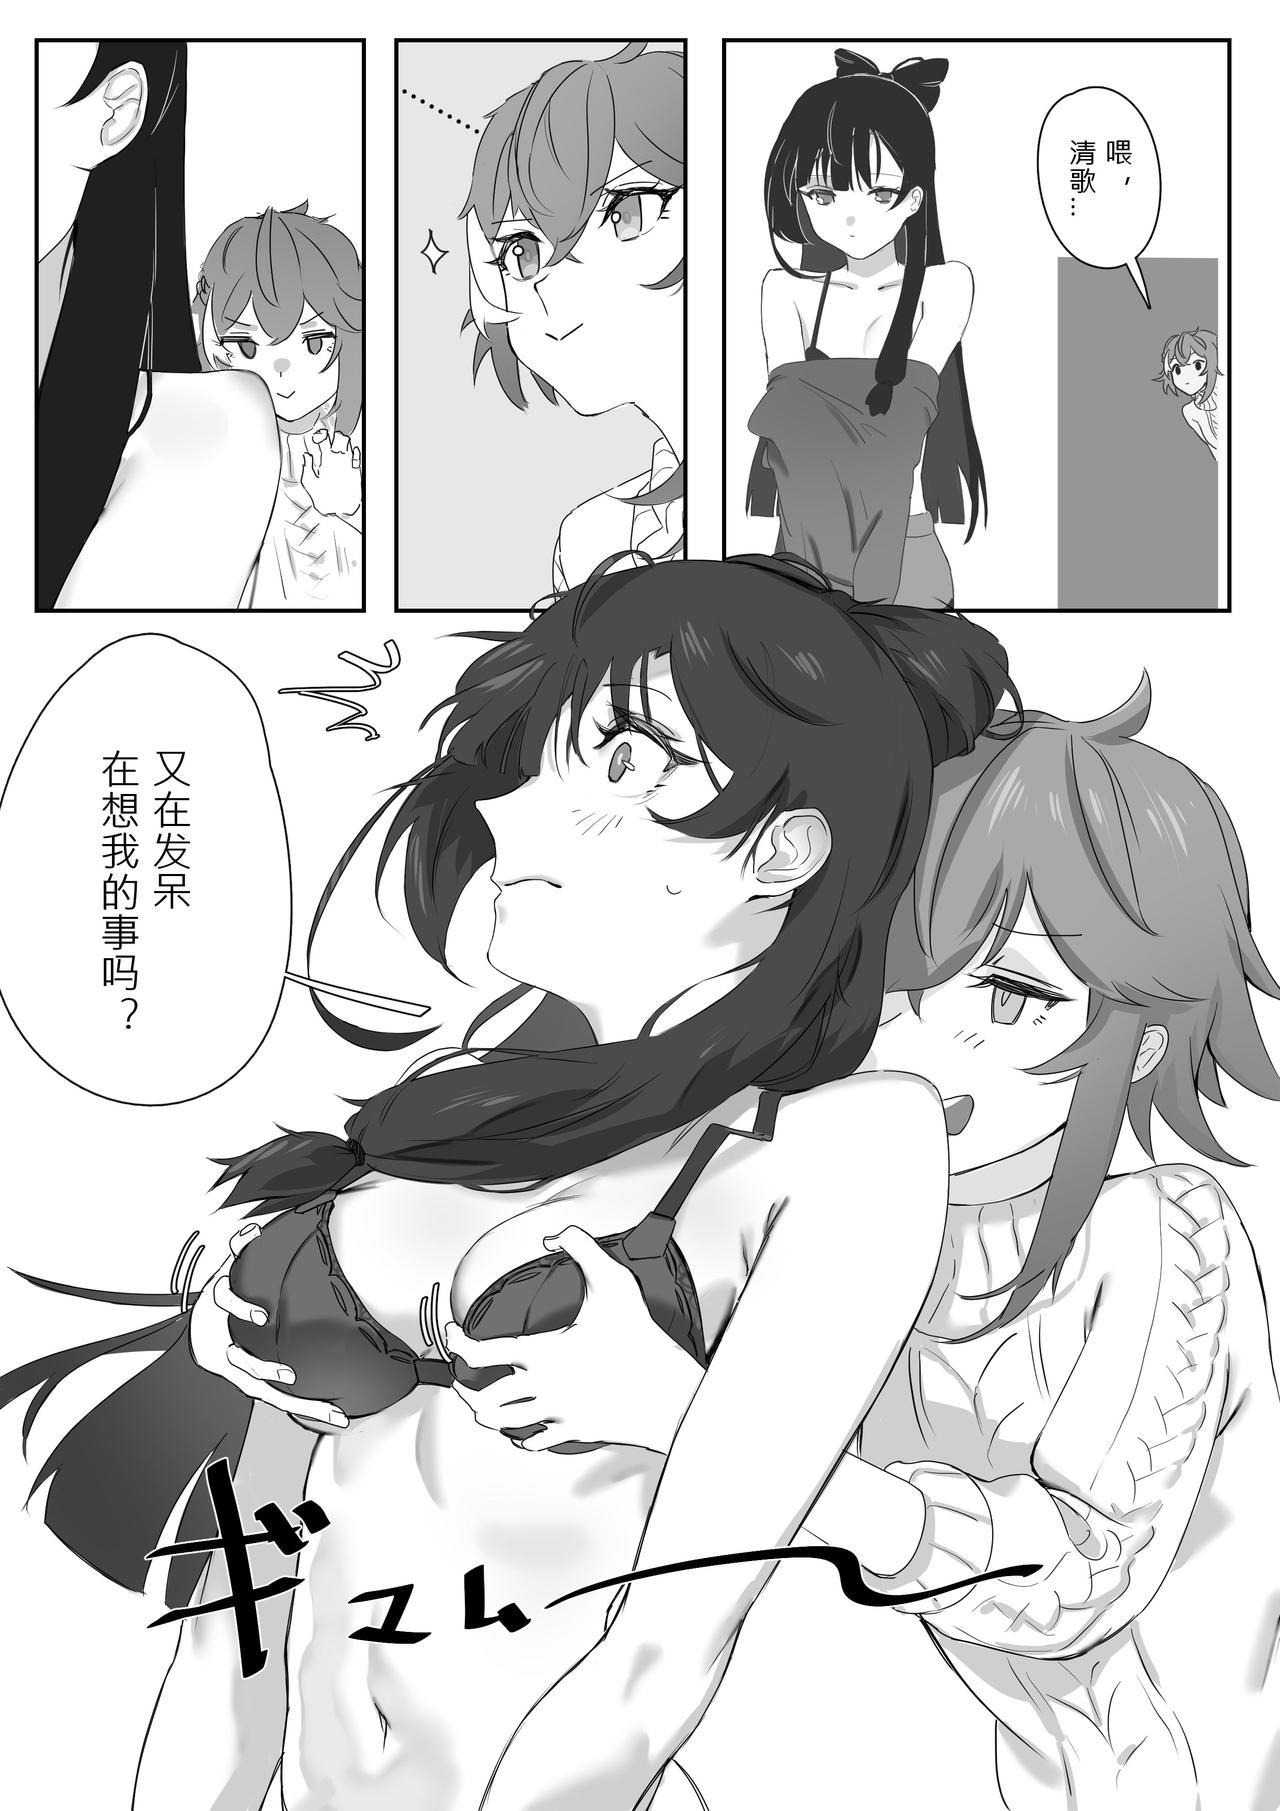 Youth Porn 百合吧歌姬！ Female - Picture 1